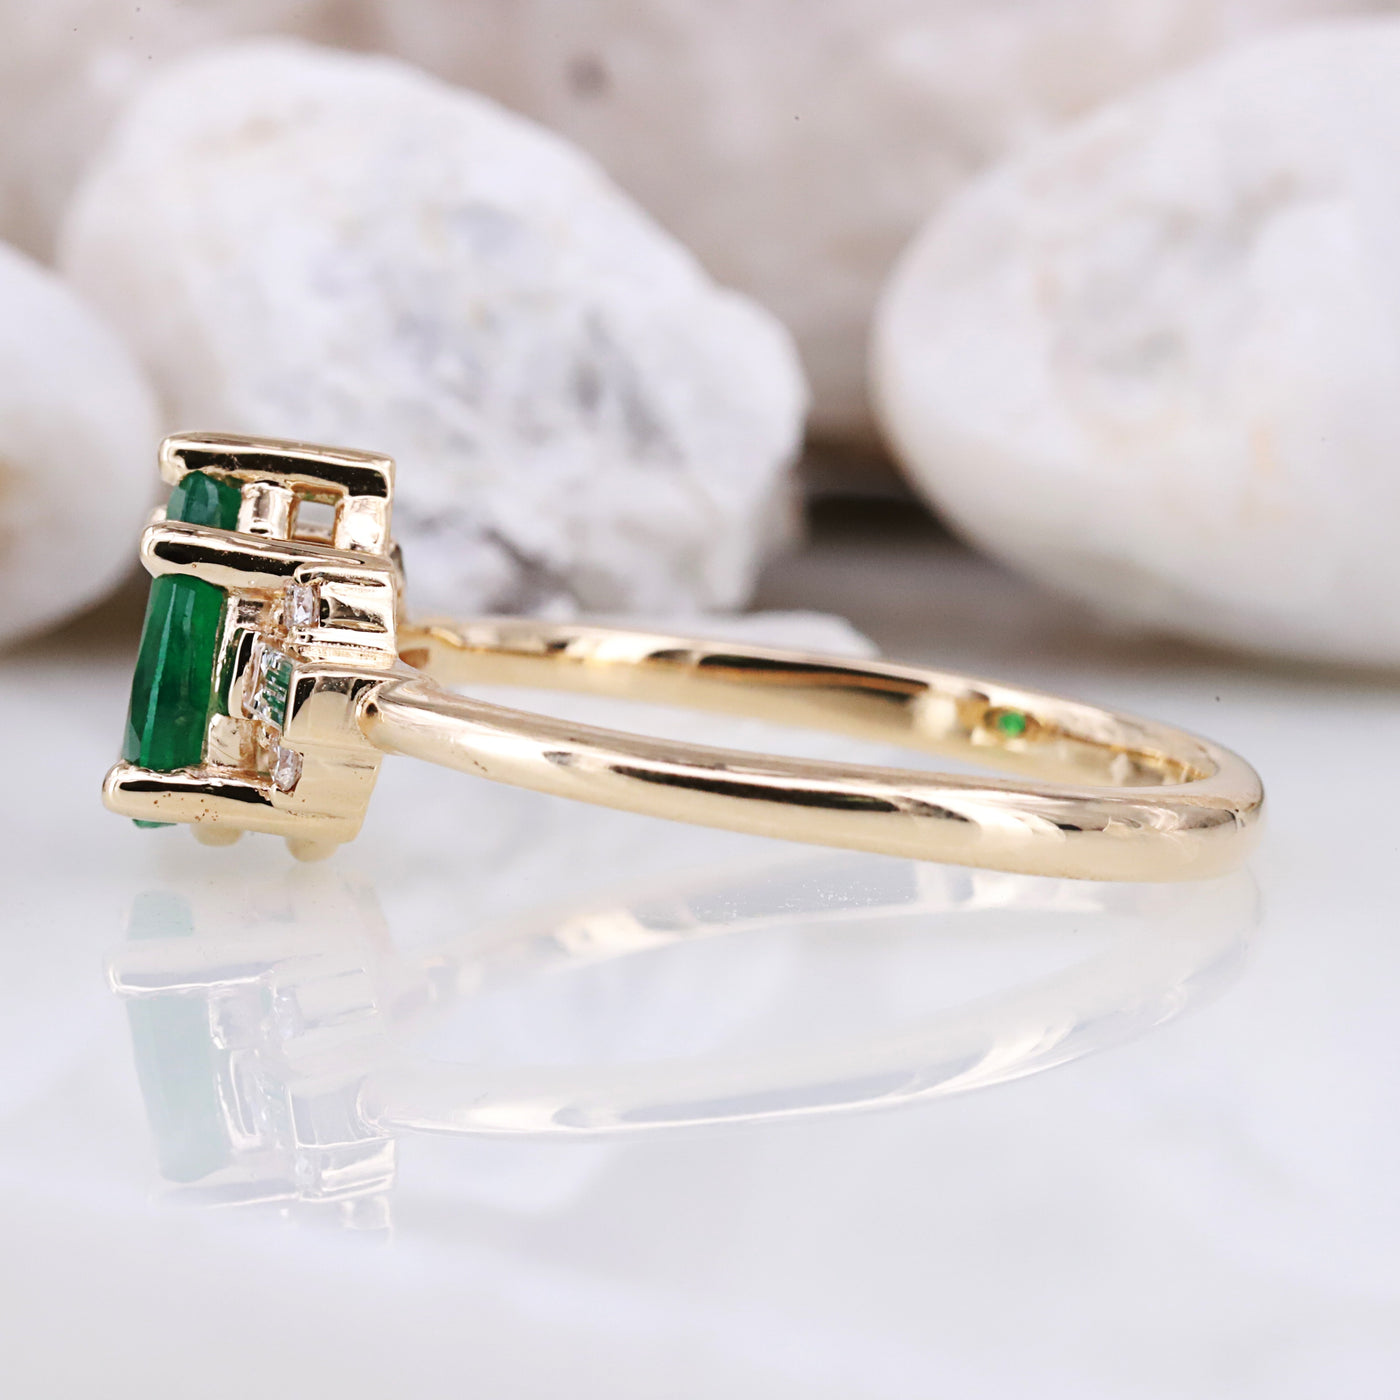 Stunning Natural Pear Shaped Emerald & Diamond Engagement Ring - Unique and Elegant Design, Perfect for any Occasion Wedding Proposal Ring